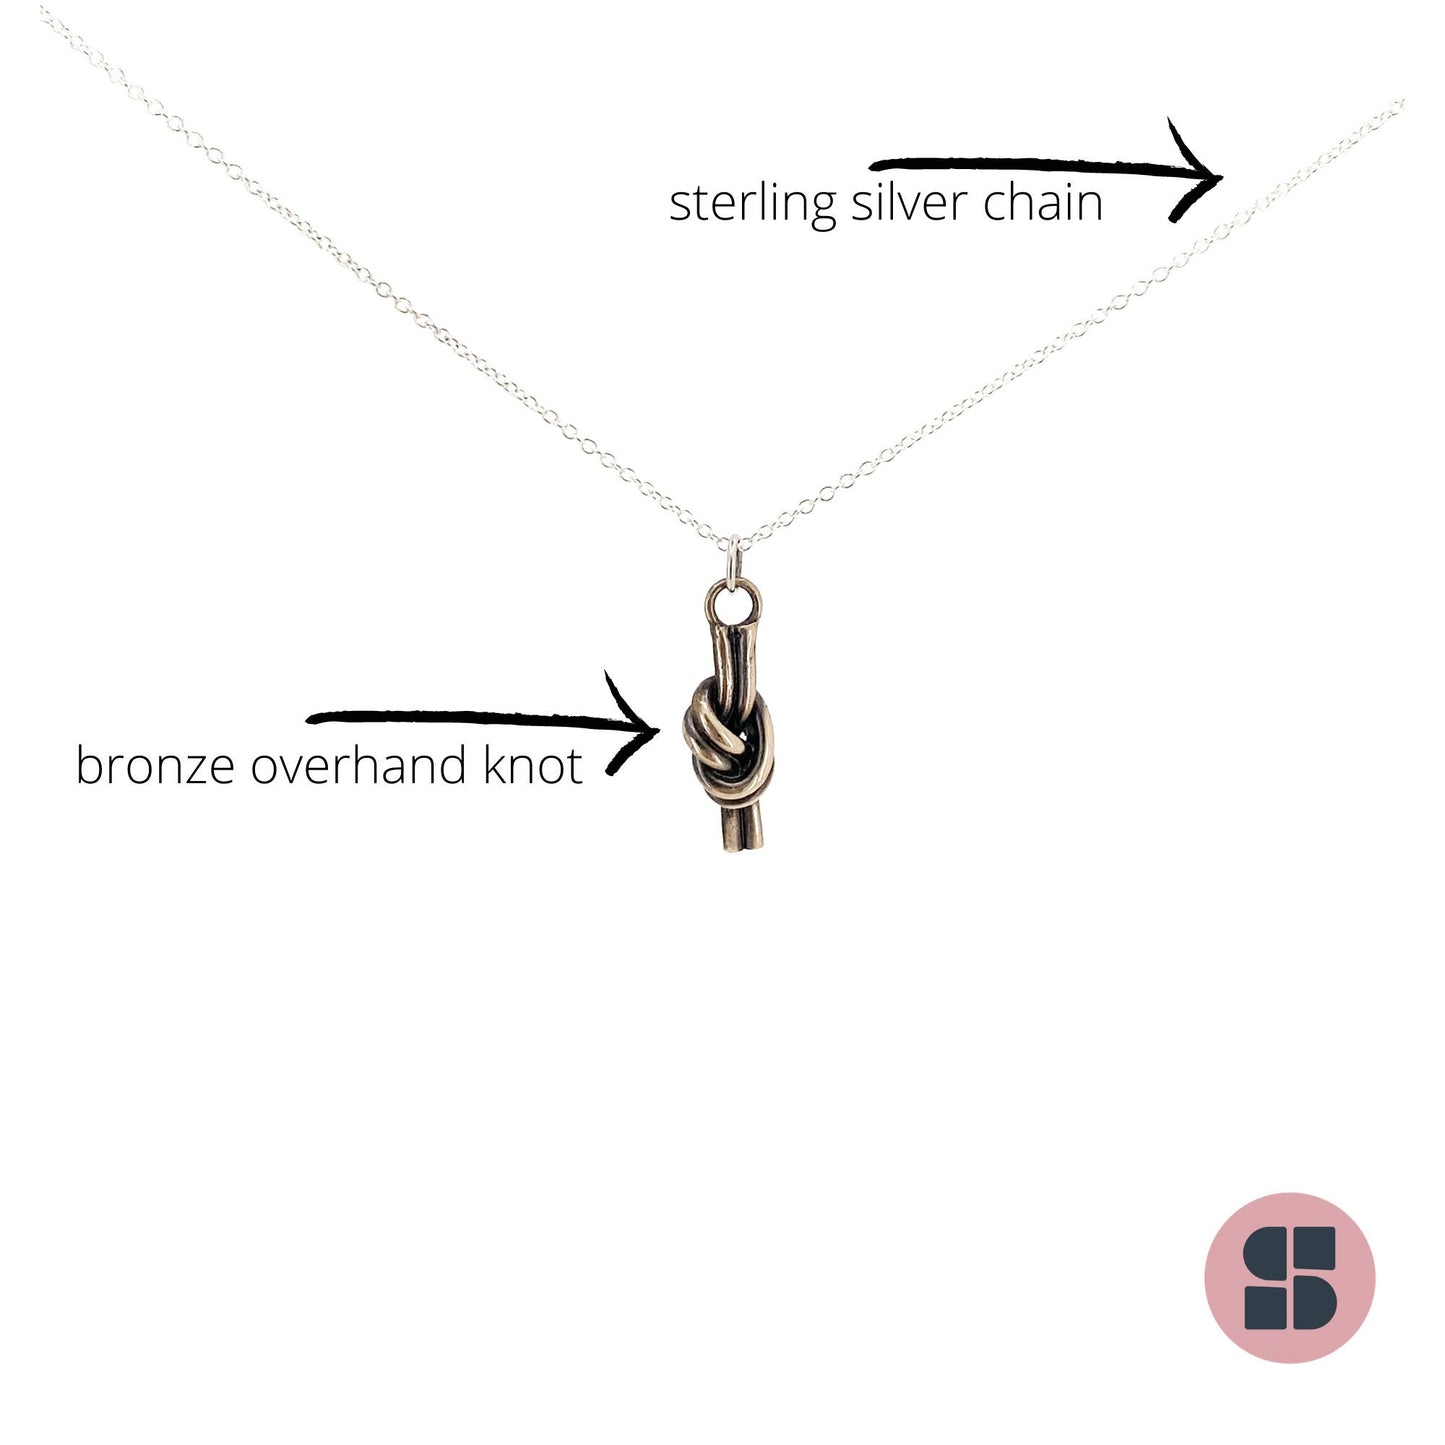 Bronze eternity knot necklace, 8th anniversary gift for wife, romantic love or friendship knot jewelry, bronze hand over hand knot